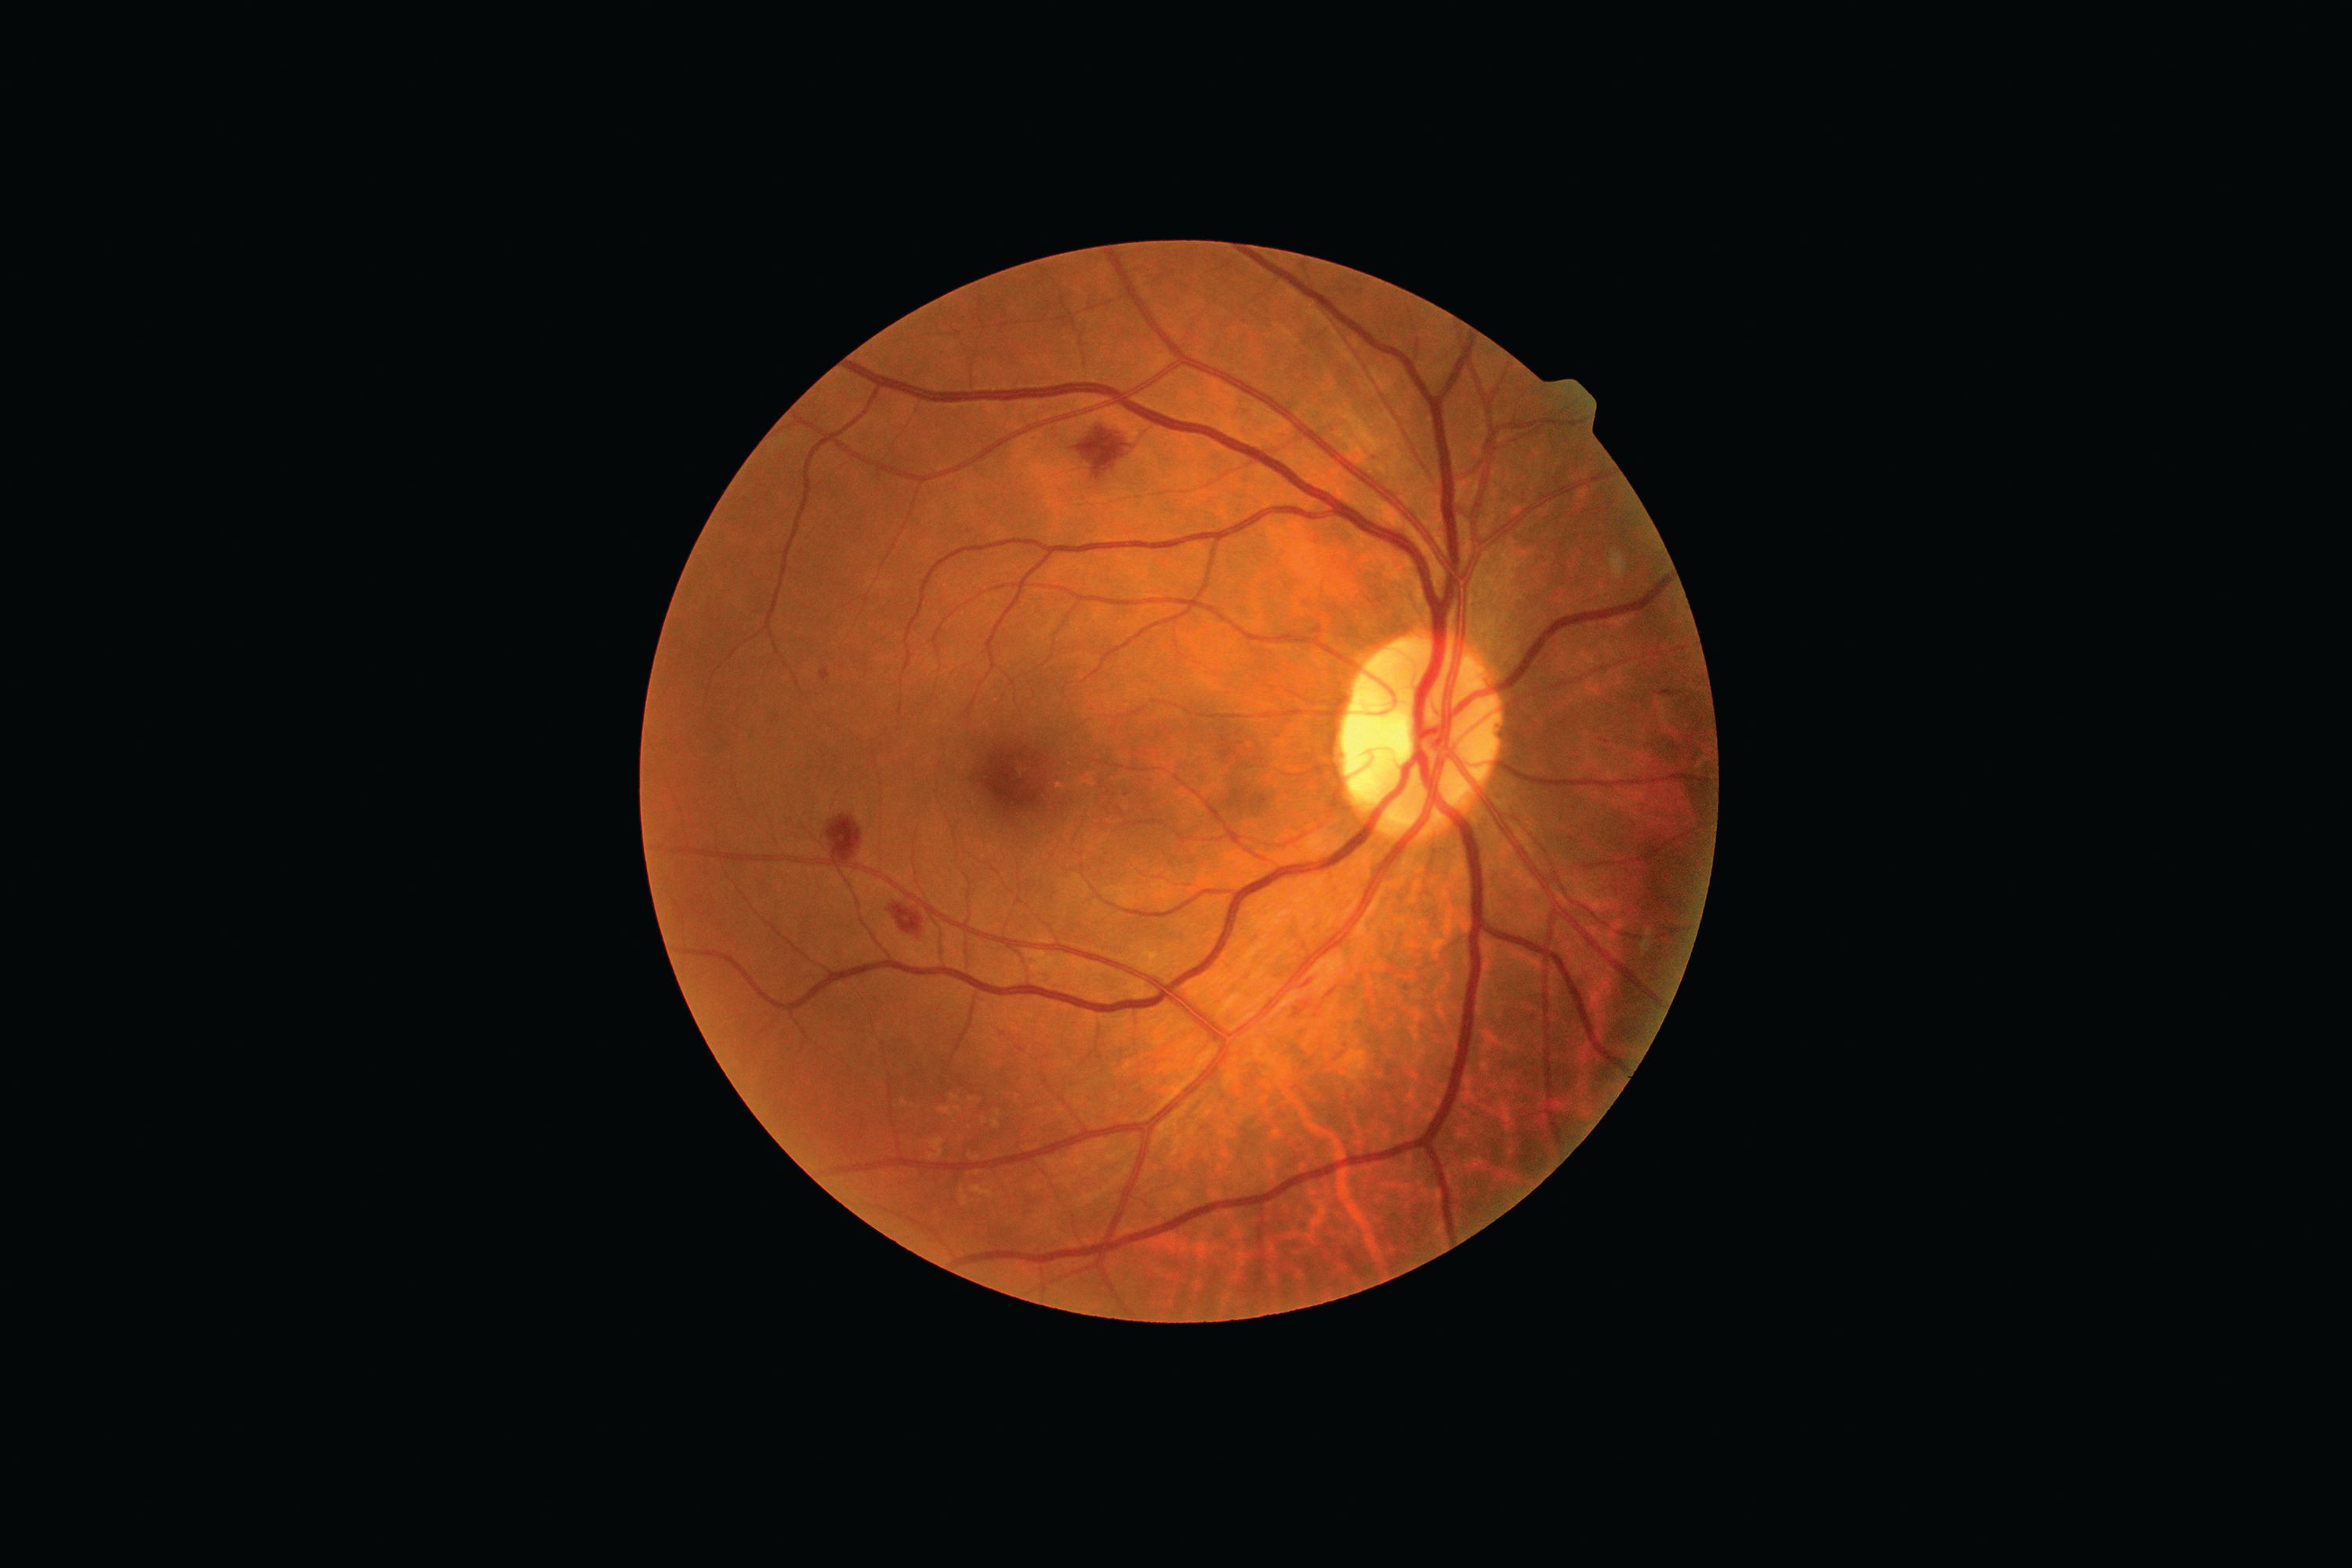 Bariatric surgery was seen to reduce the prevalence of sight-threatening DR by 53%.